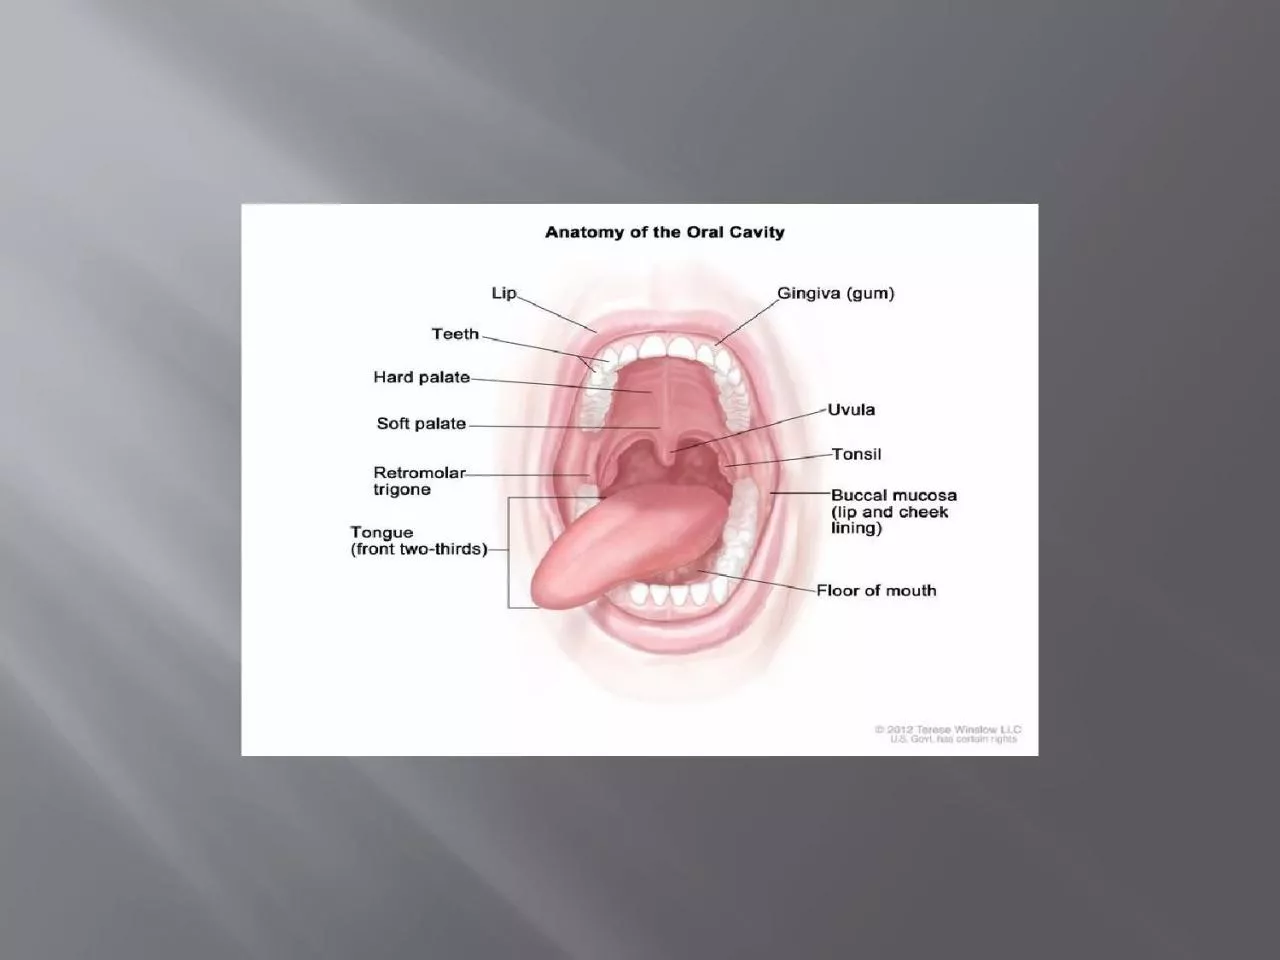 ORAL CAVITY The oral cavity is formed by a bewildering array of tissues which function